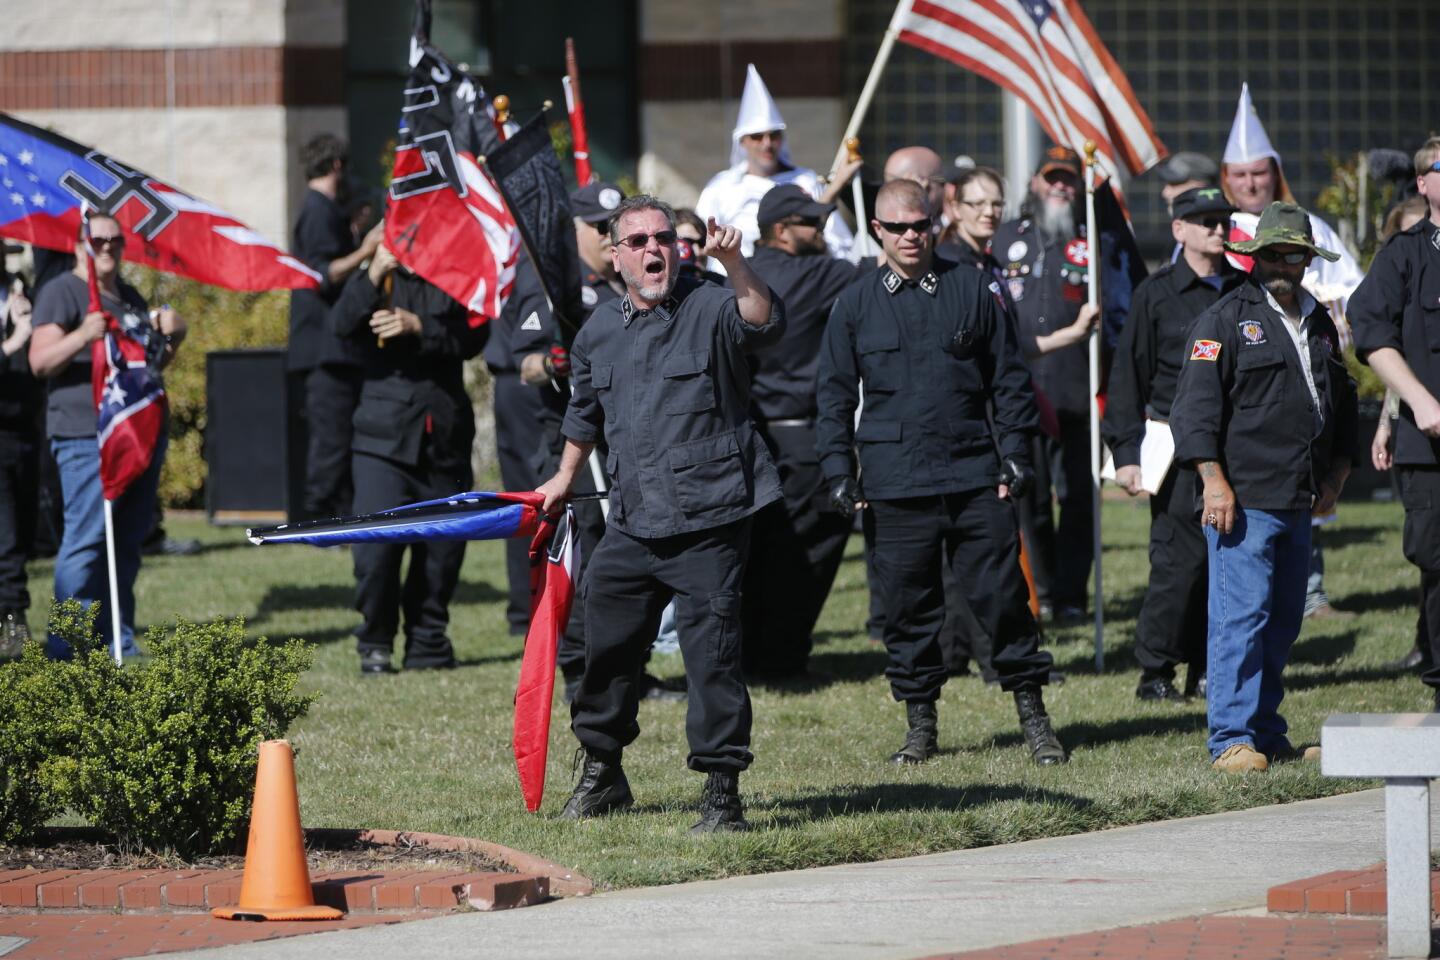 Members of the Ku Klux Klan take part in a "white pride" rally in Rome, Ga., in April. Klan leaders say they believe U.S. politics are going their way, as a nationalist, us-against-them mentality deepens across the nation.